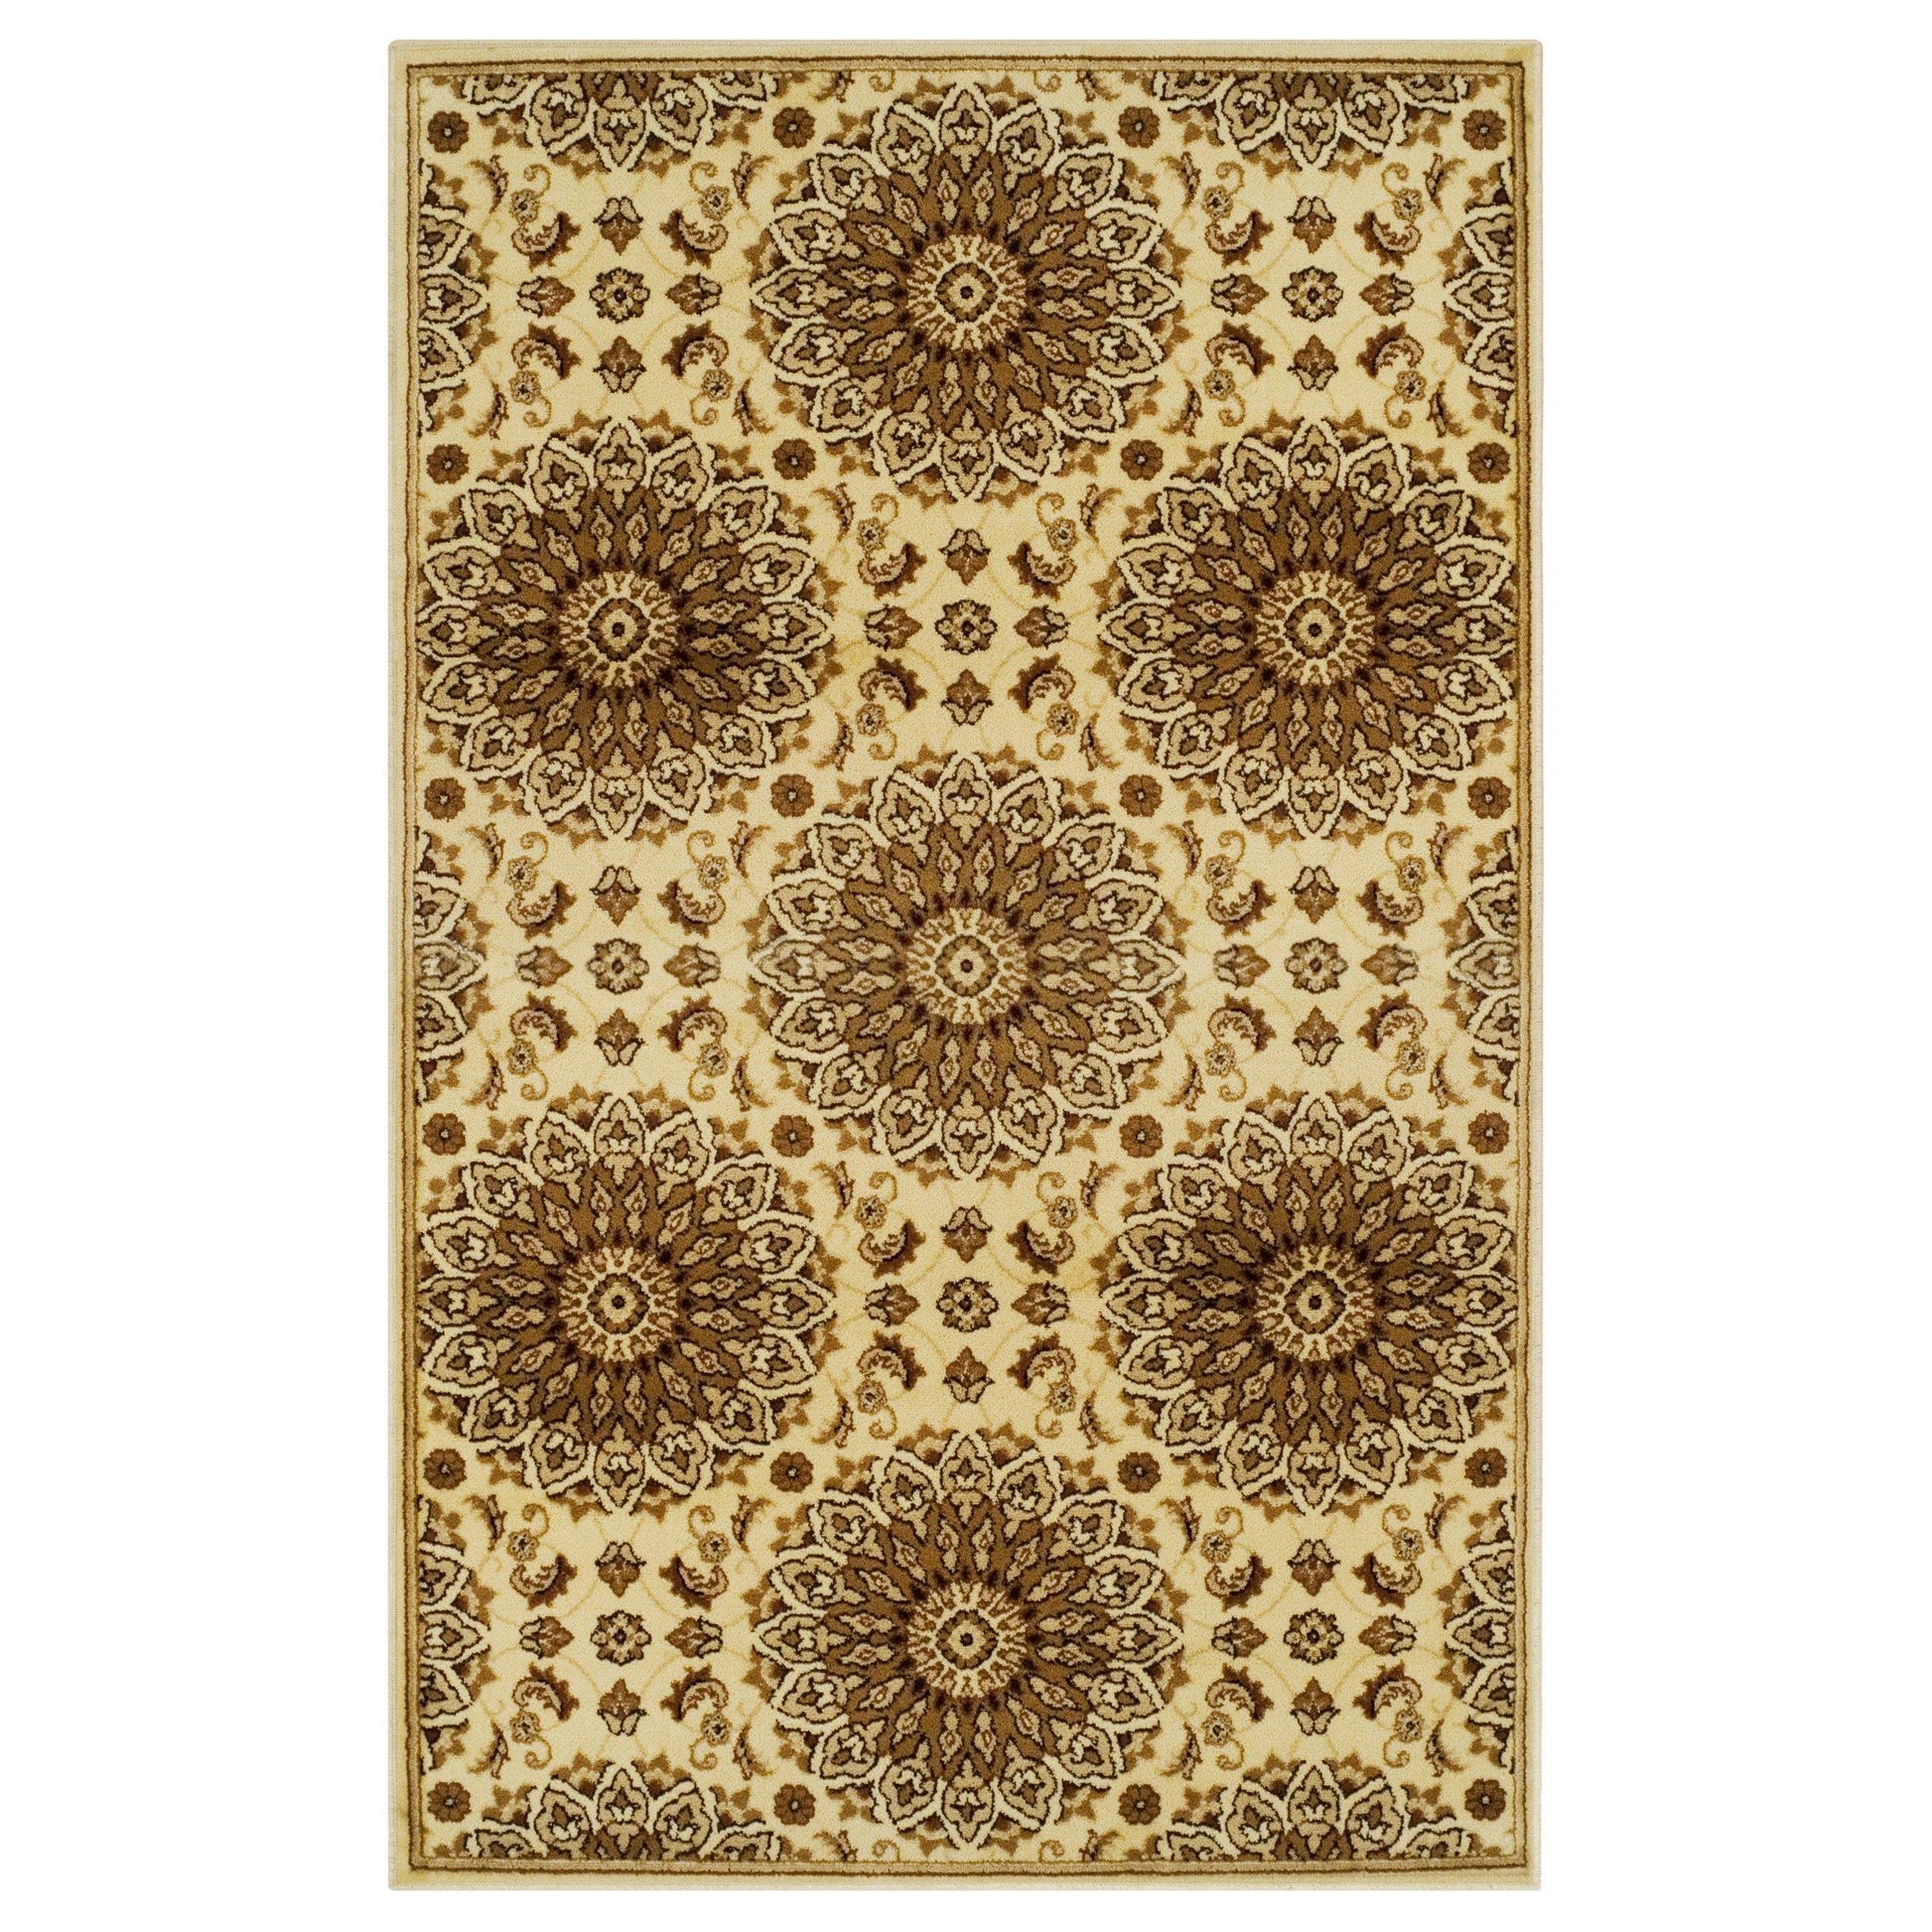 Marigold Vintage French Aubusson Design Floral Rug FredCo